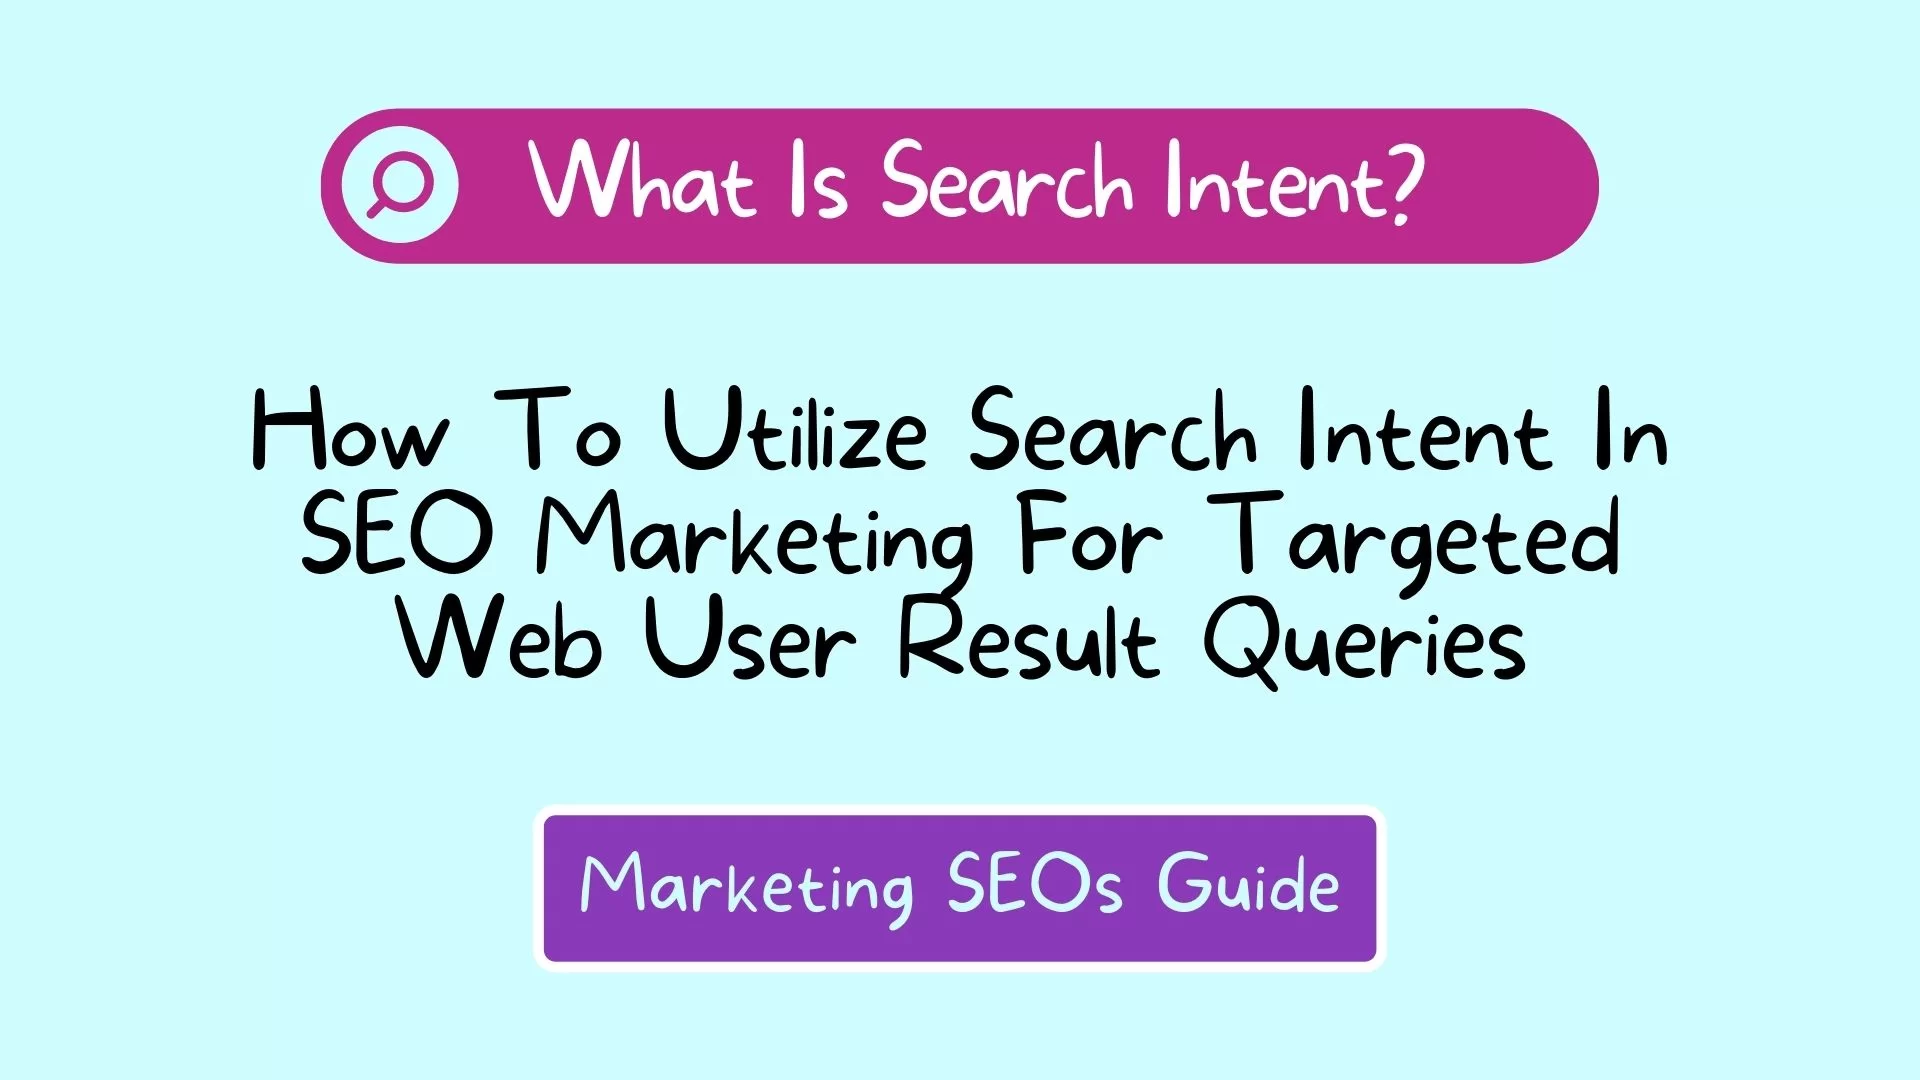 Why Search Intent In SEO Is An Important Marketing Element